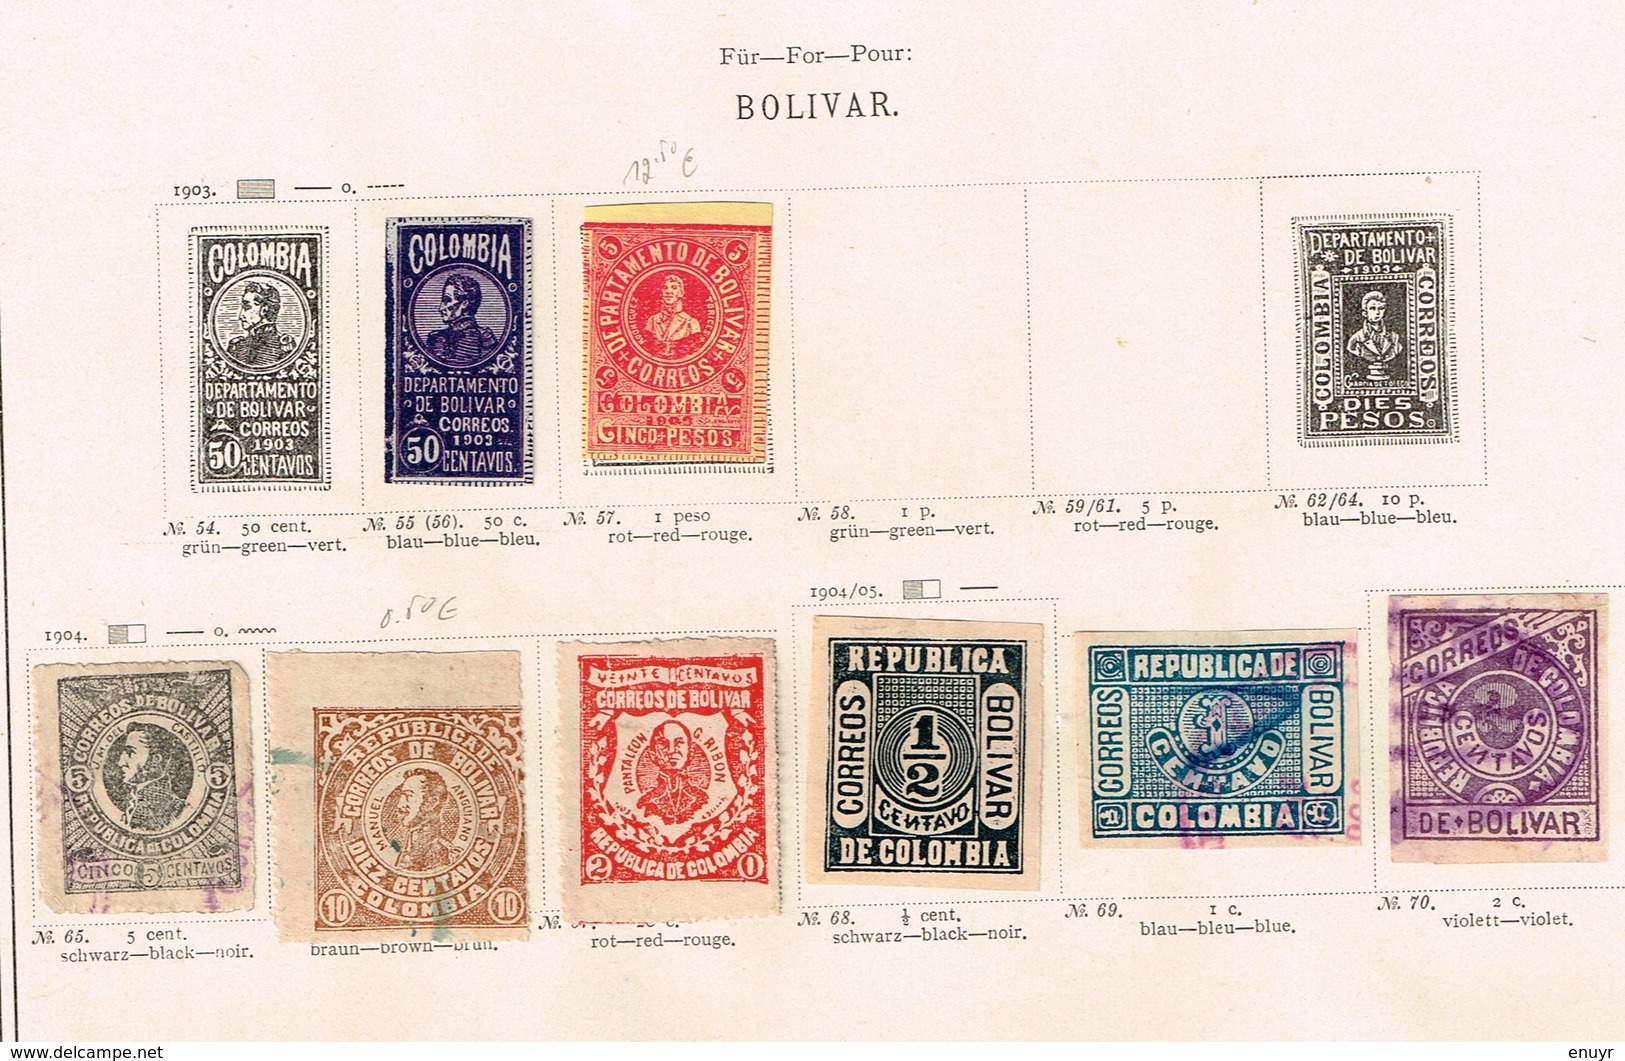 Colombie + Provinces. Ancienne collection. Old collection. Altsammlung. Oude verzameling